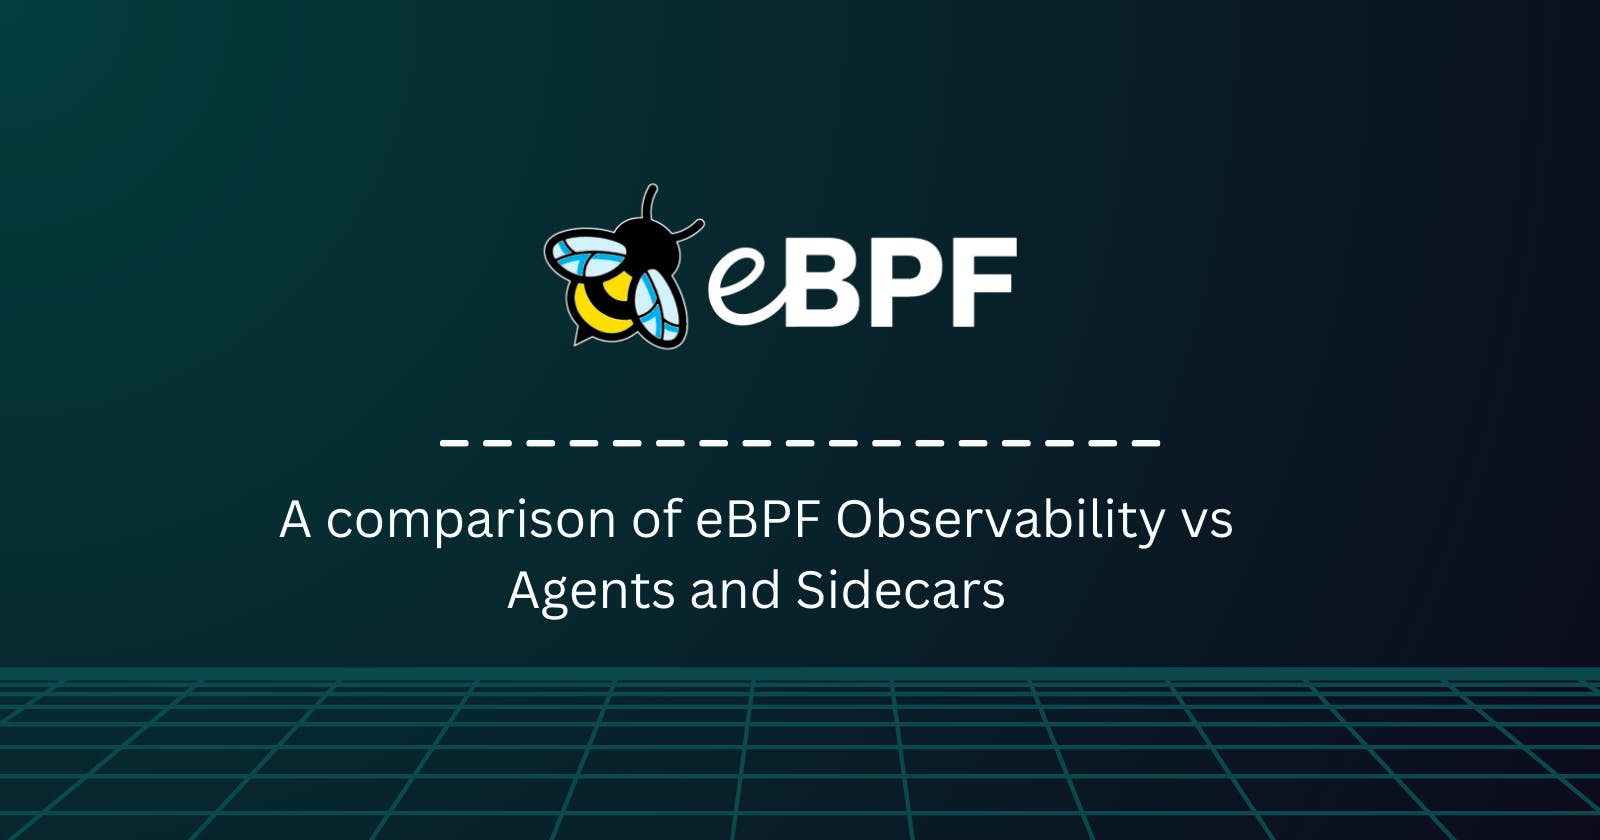 A comparison of eBPF Observability vs Agents and Sidecars